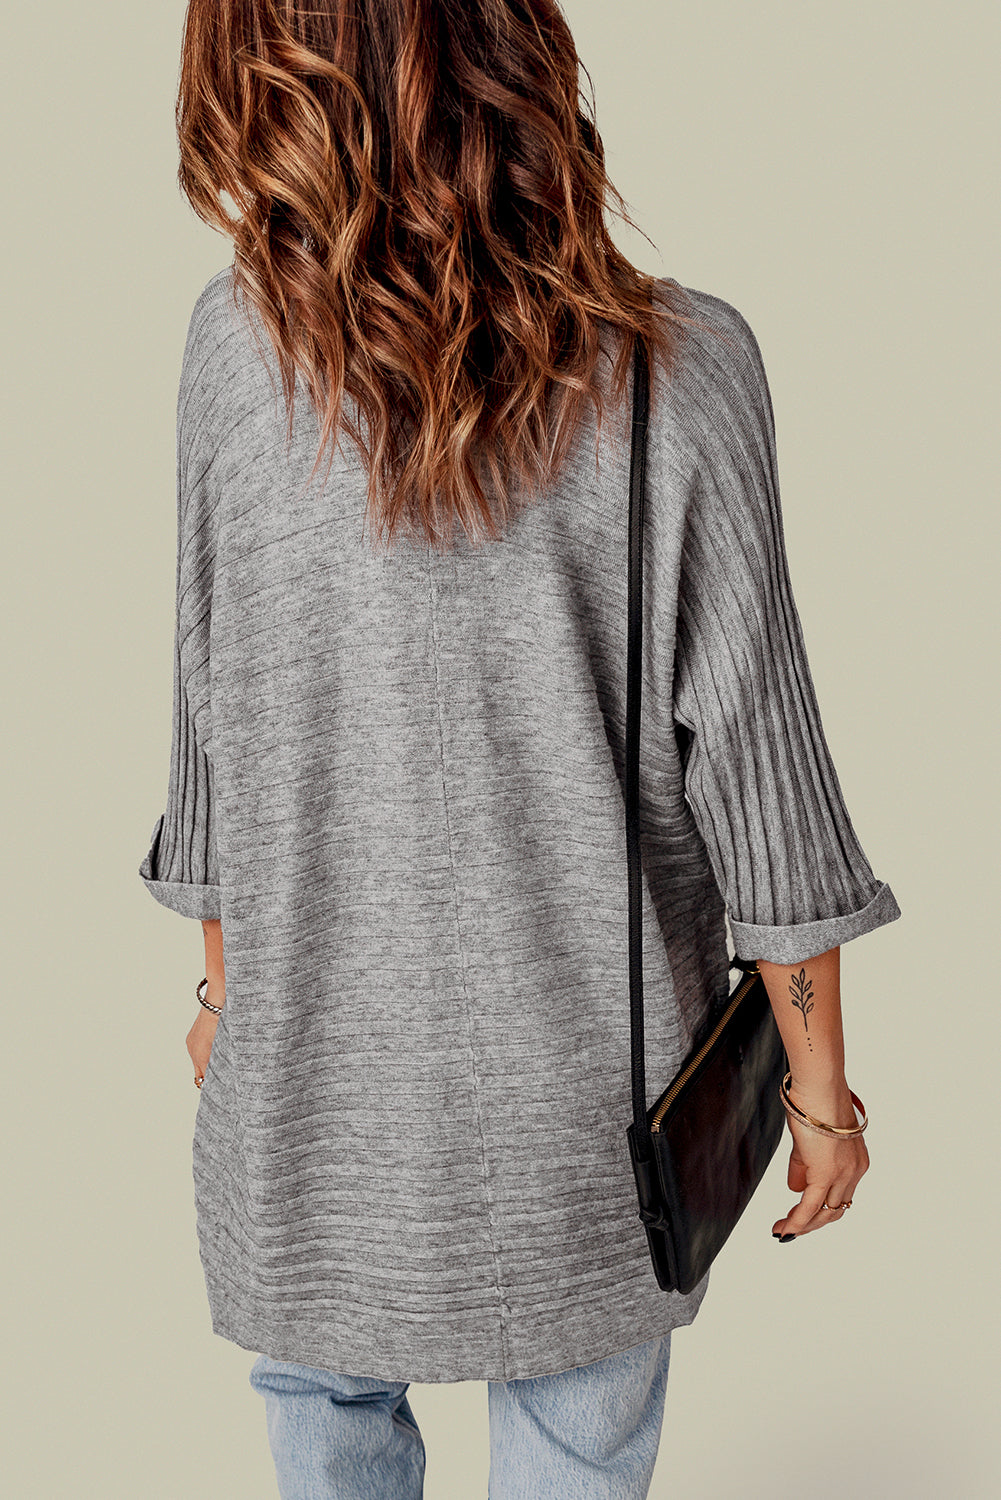 Gray Ribbed Open Front Knit Cardigan